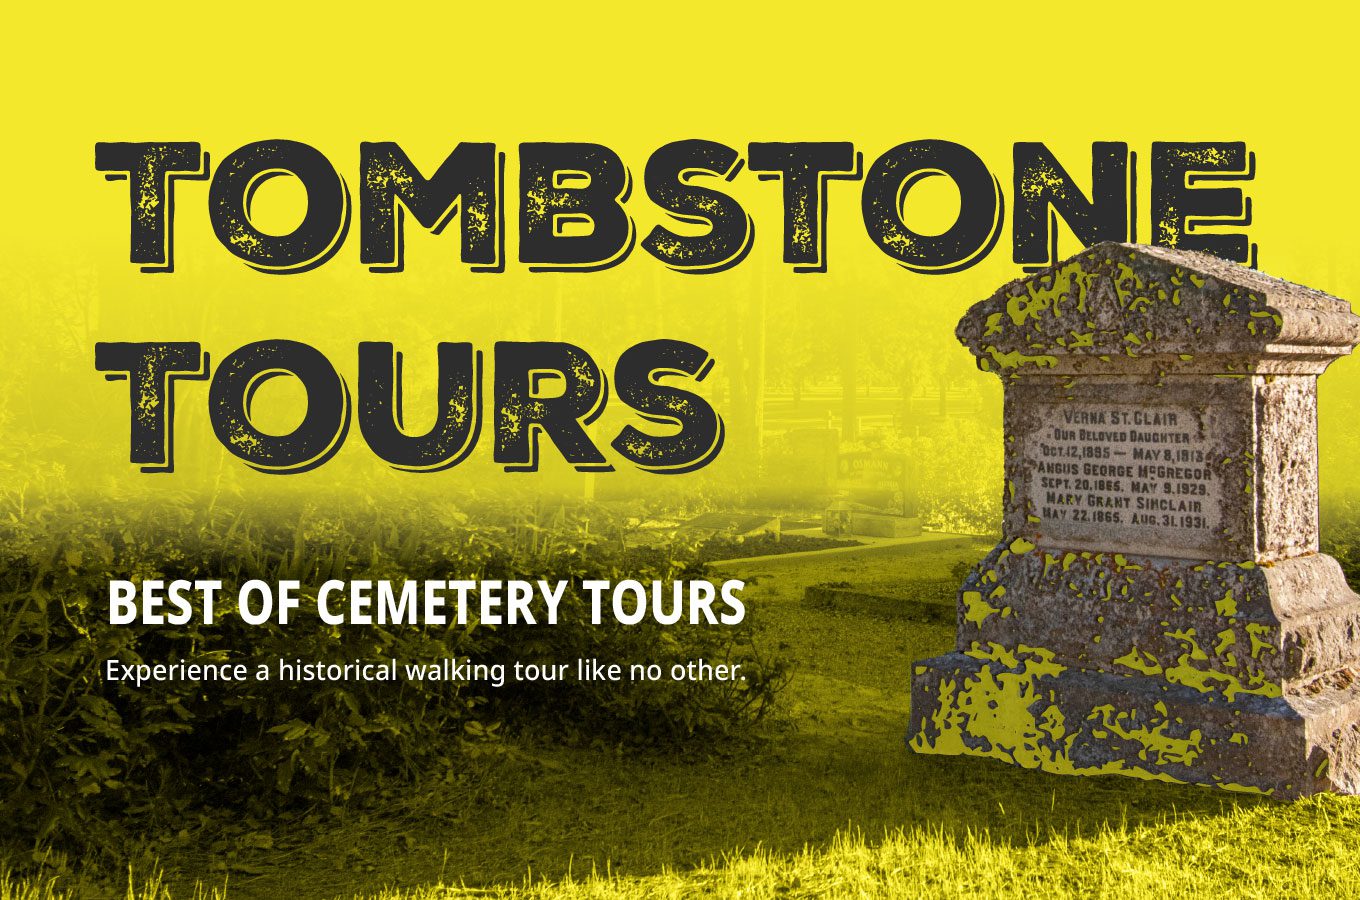 Tombstone Tours: Best of Cemetery Tours